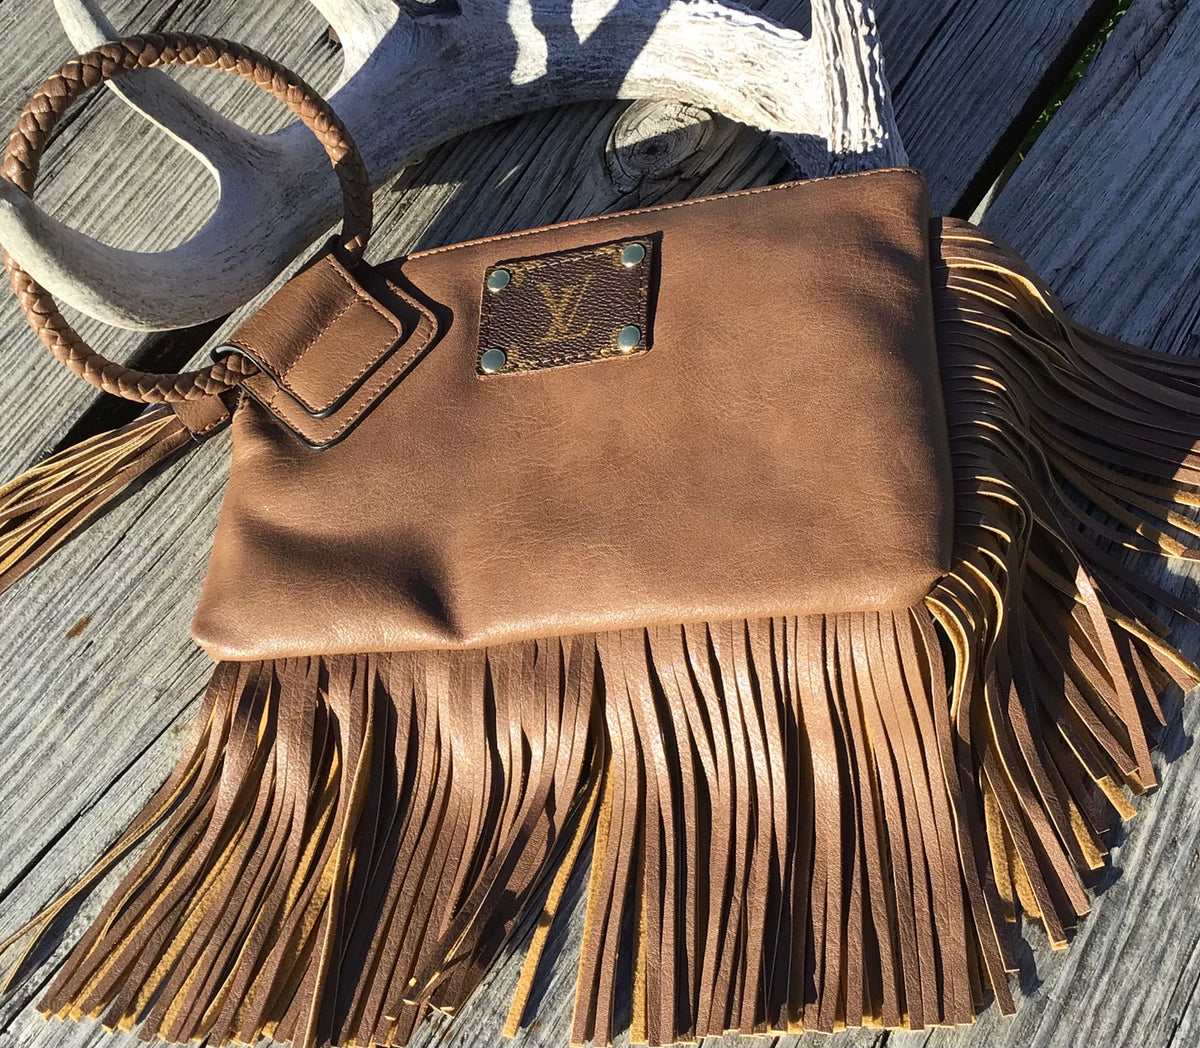 Polished Coconut - #upcycled Louis Vuitton fringe bag #slowfashion  #repurposed LV #ethicalluxury @polishedcoconut #our rodeo skirt #hand  stitched Mexican belt with sterling silver vintage buckle #satin Bill Blass  blouse #small batch production